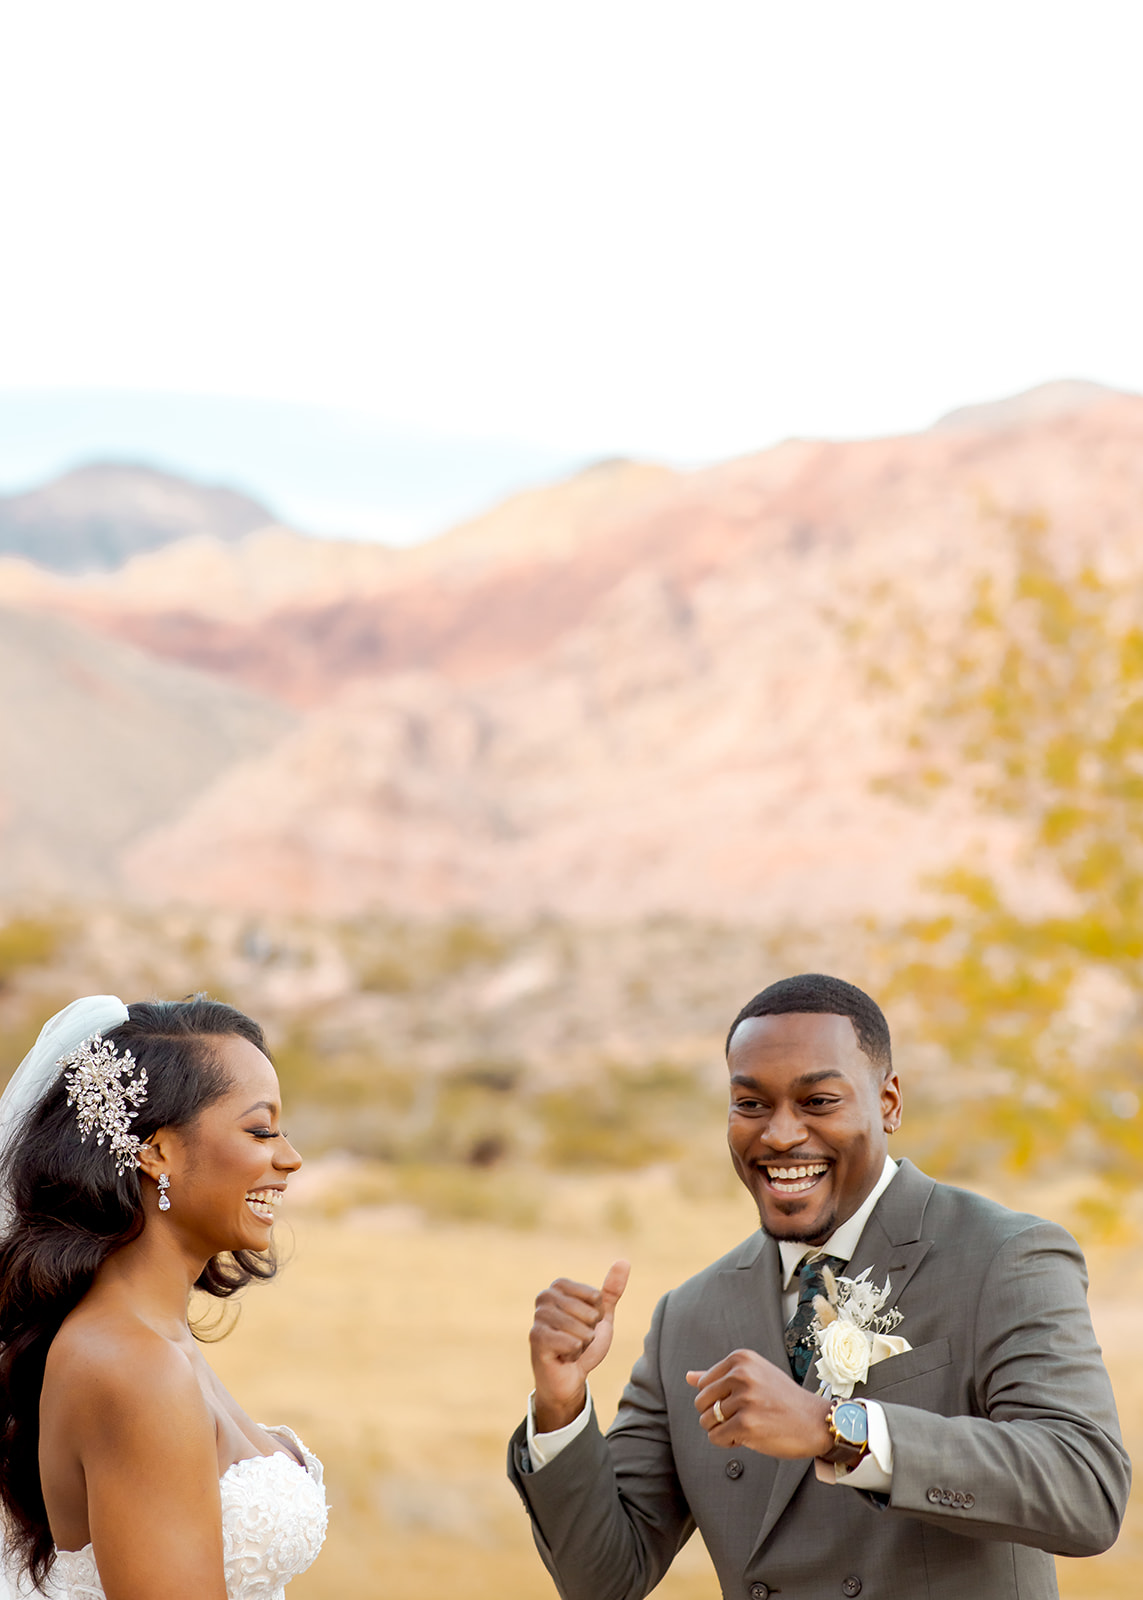 Groom celebrating and bride laughing after ring exchange 